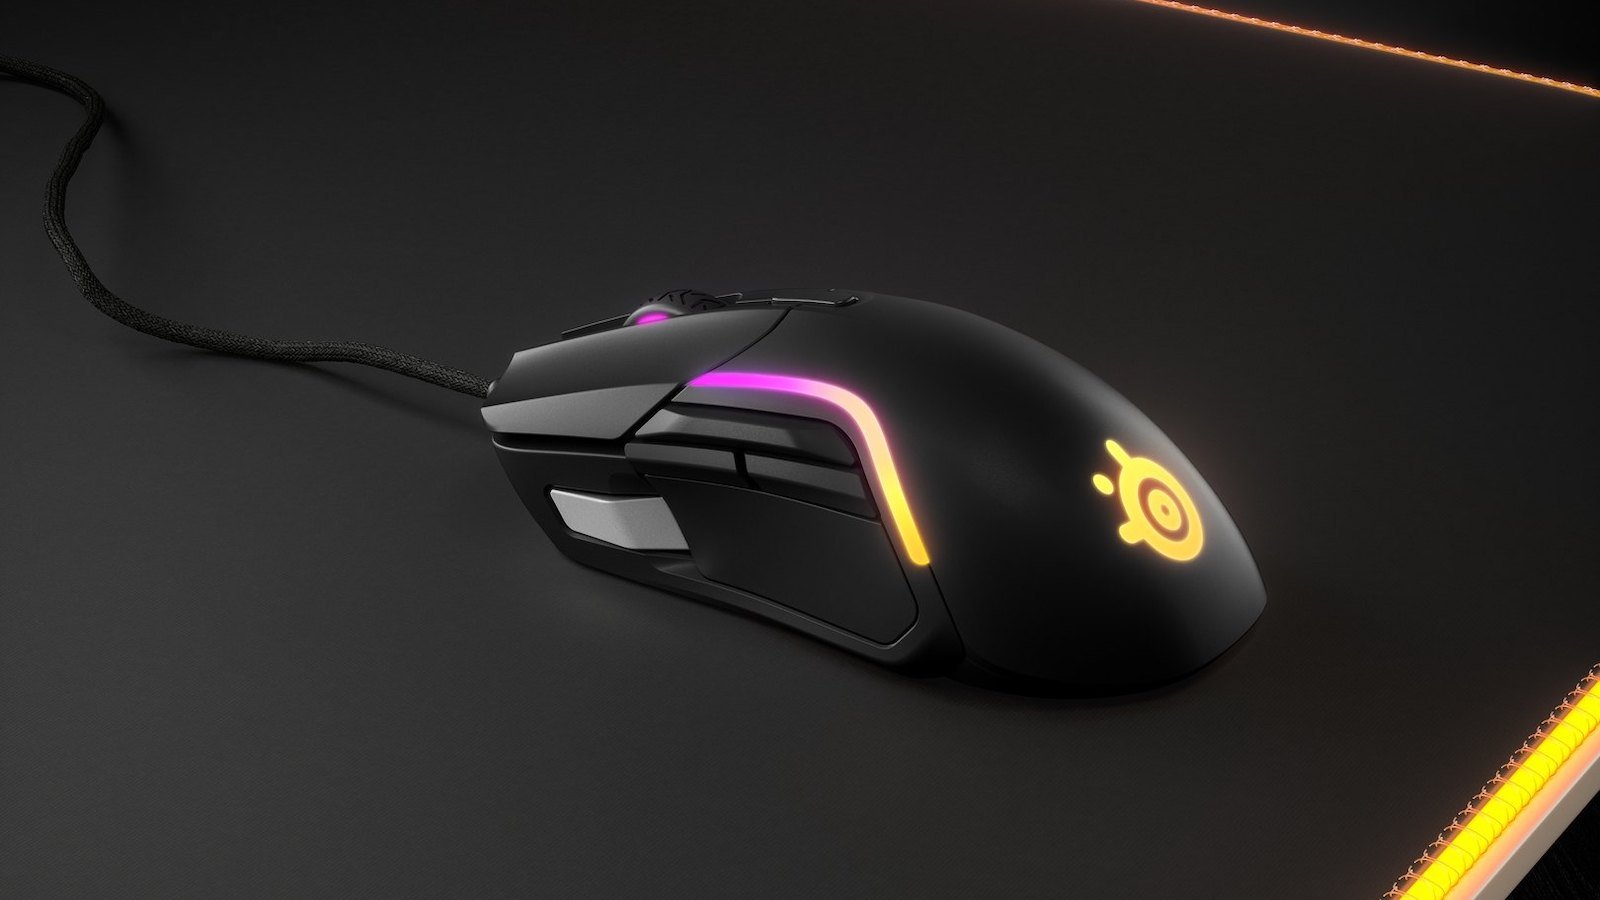 SteelSeries Rival 5 gaming mouse has an optical gaming sensor for 1-to-1 tracking